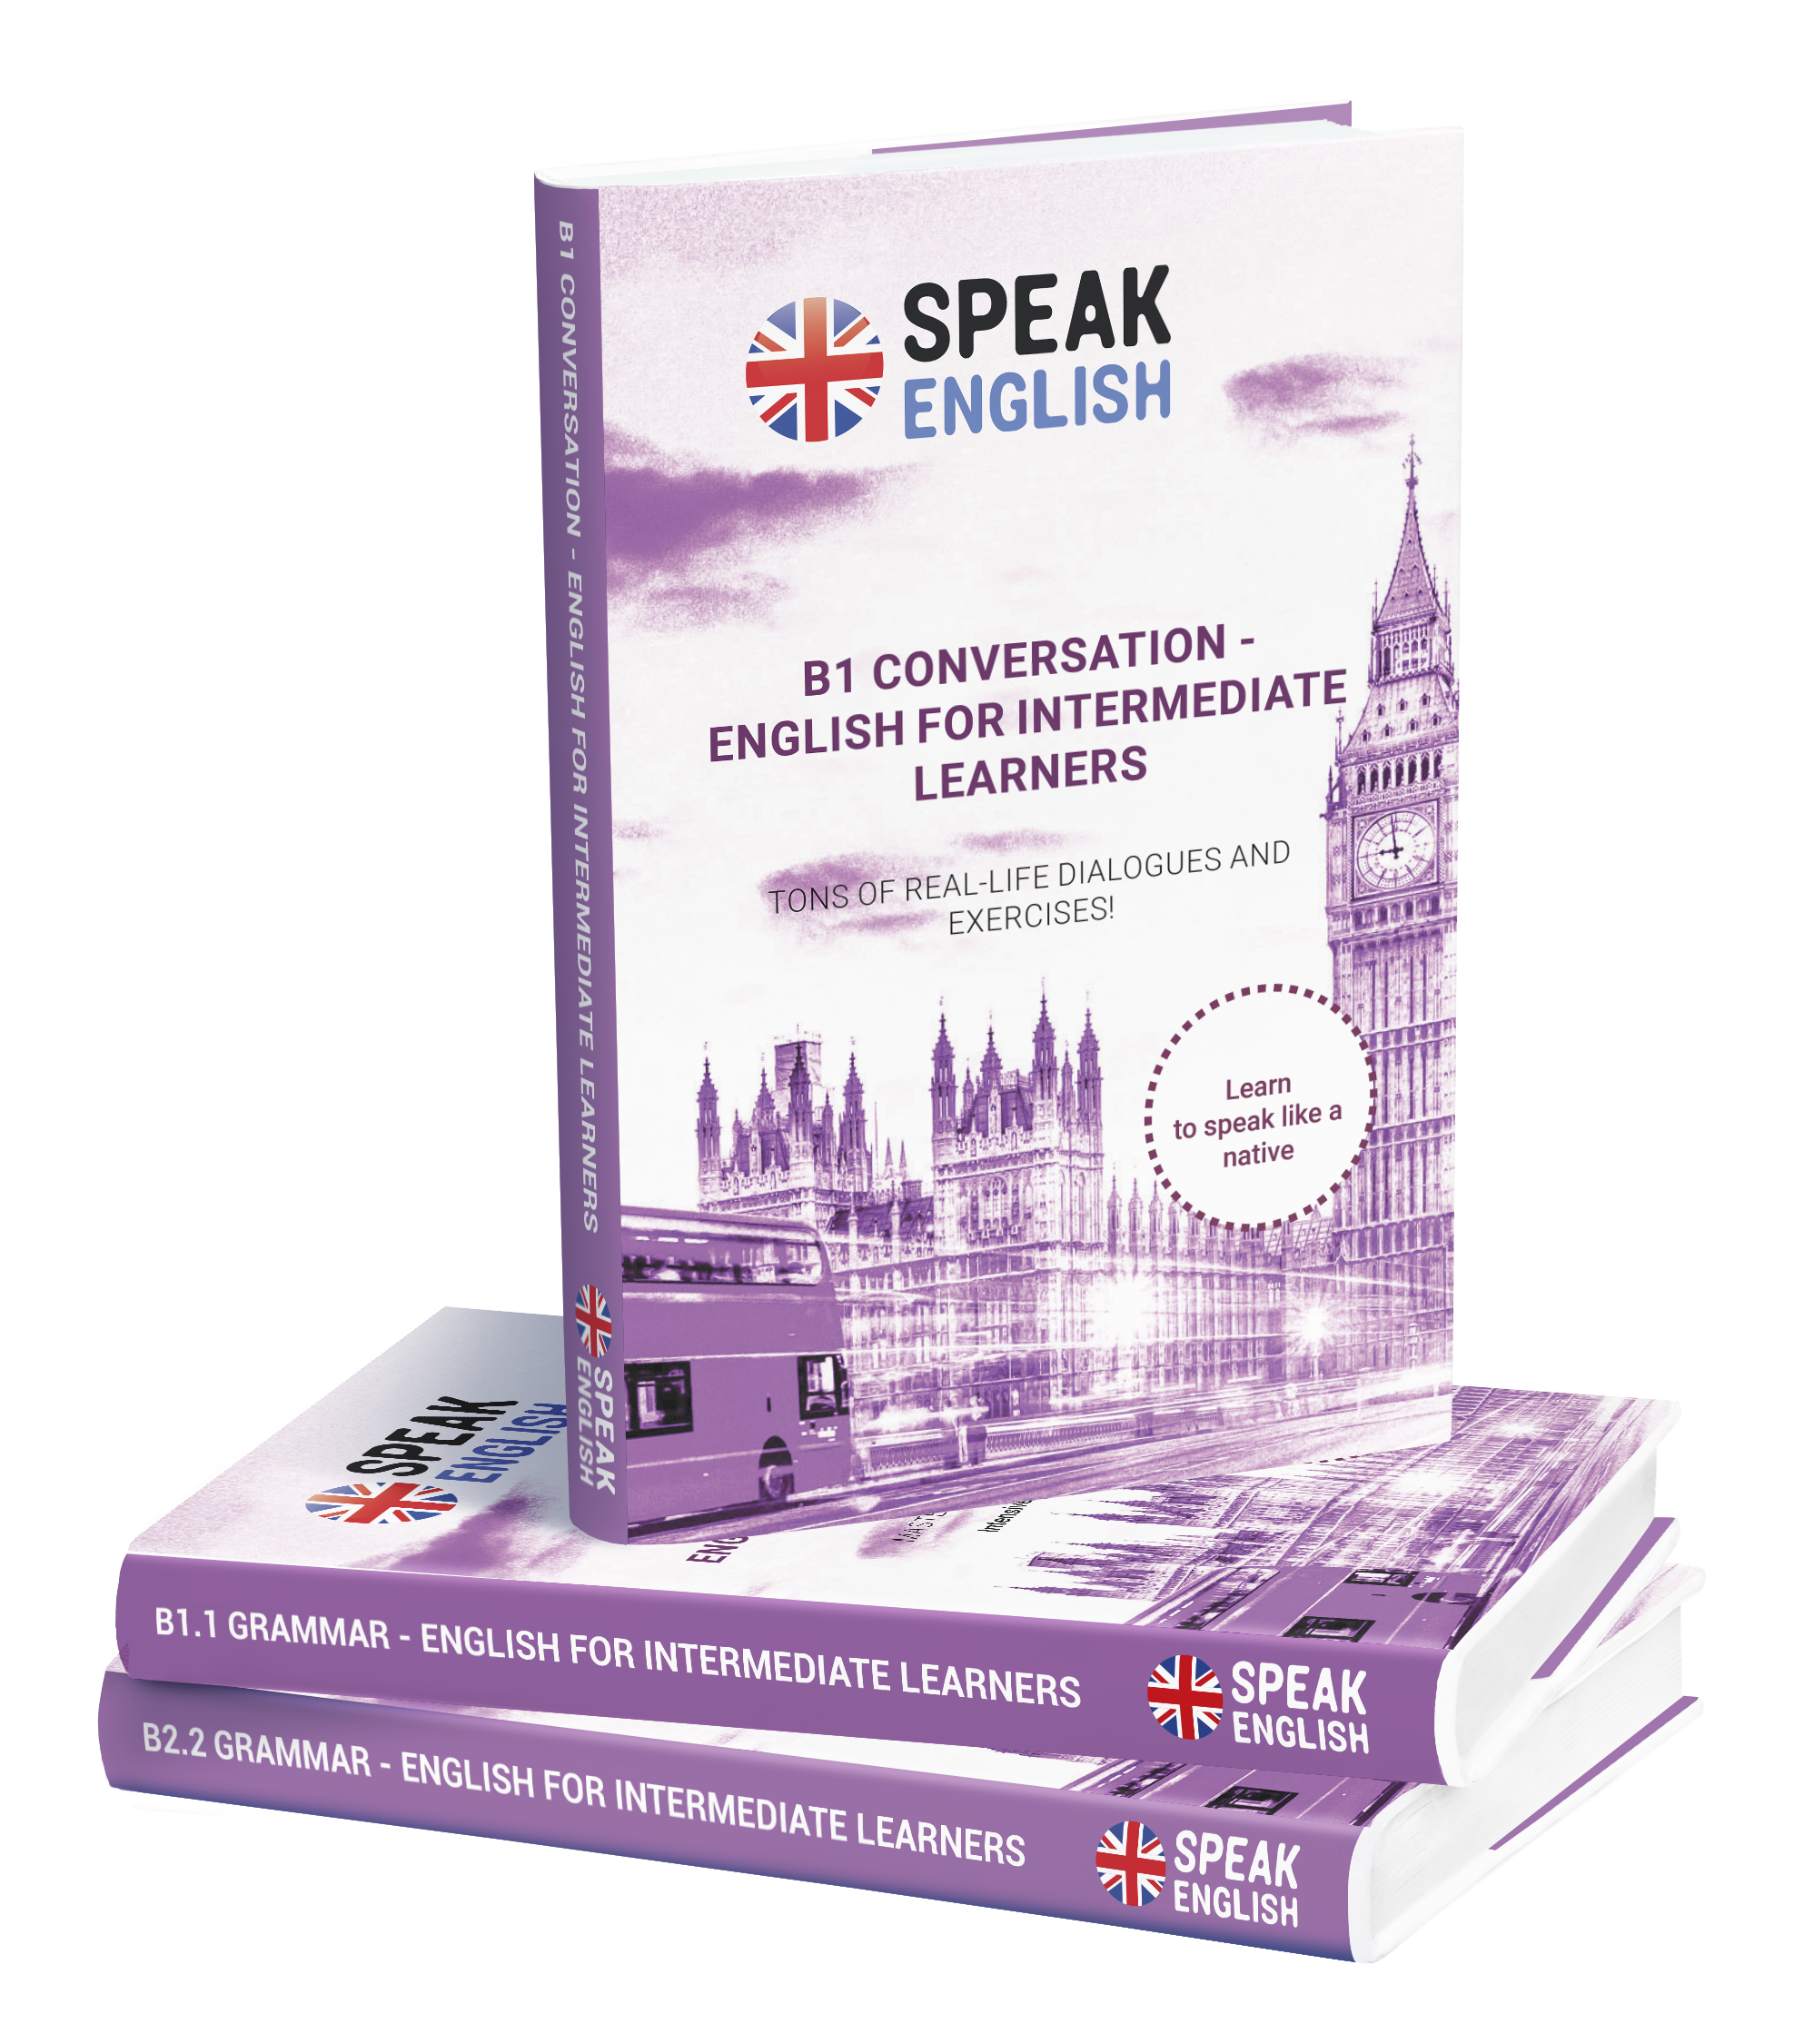 B1 level English books and intensive course 